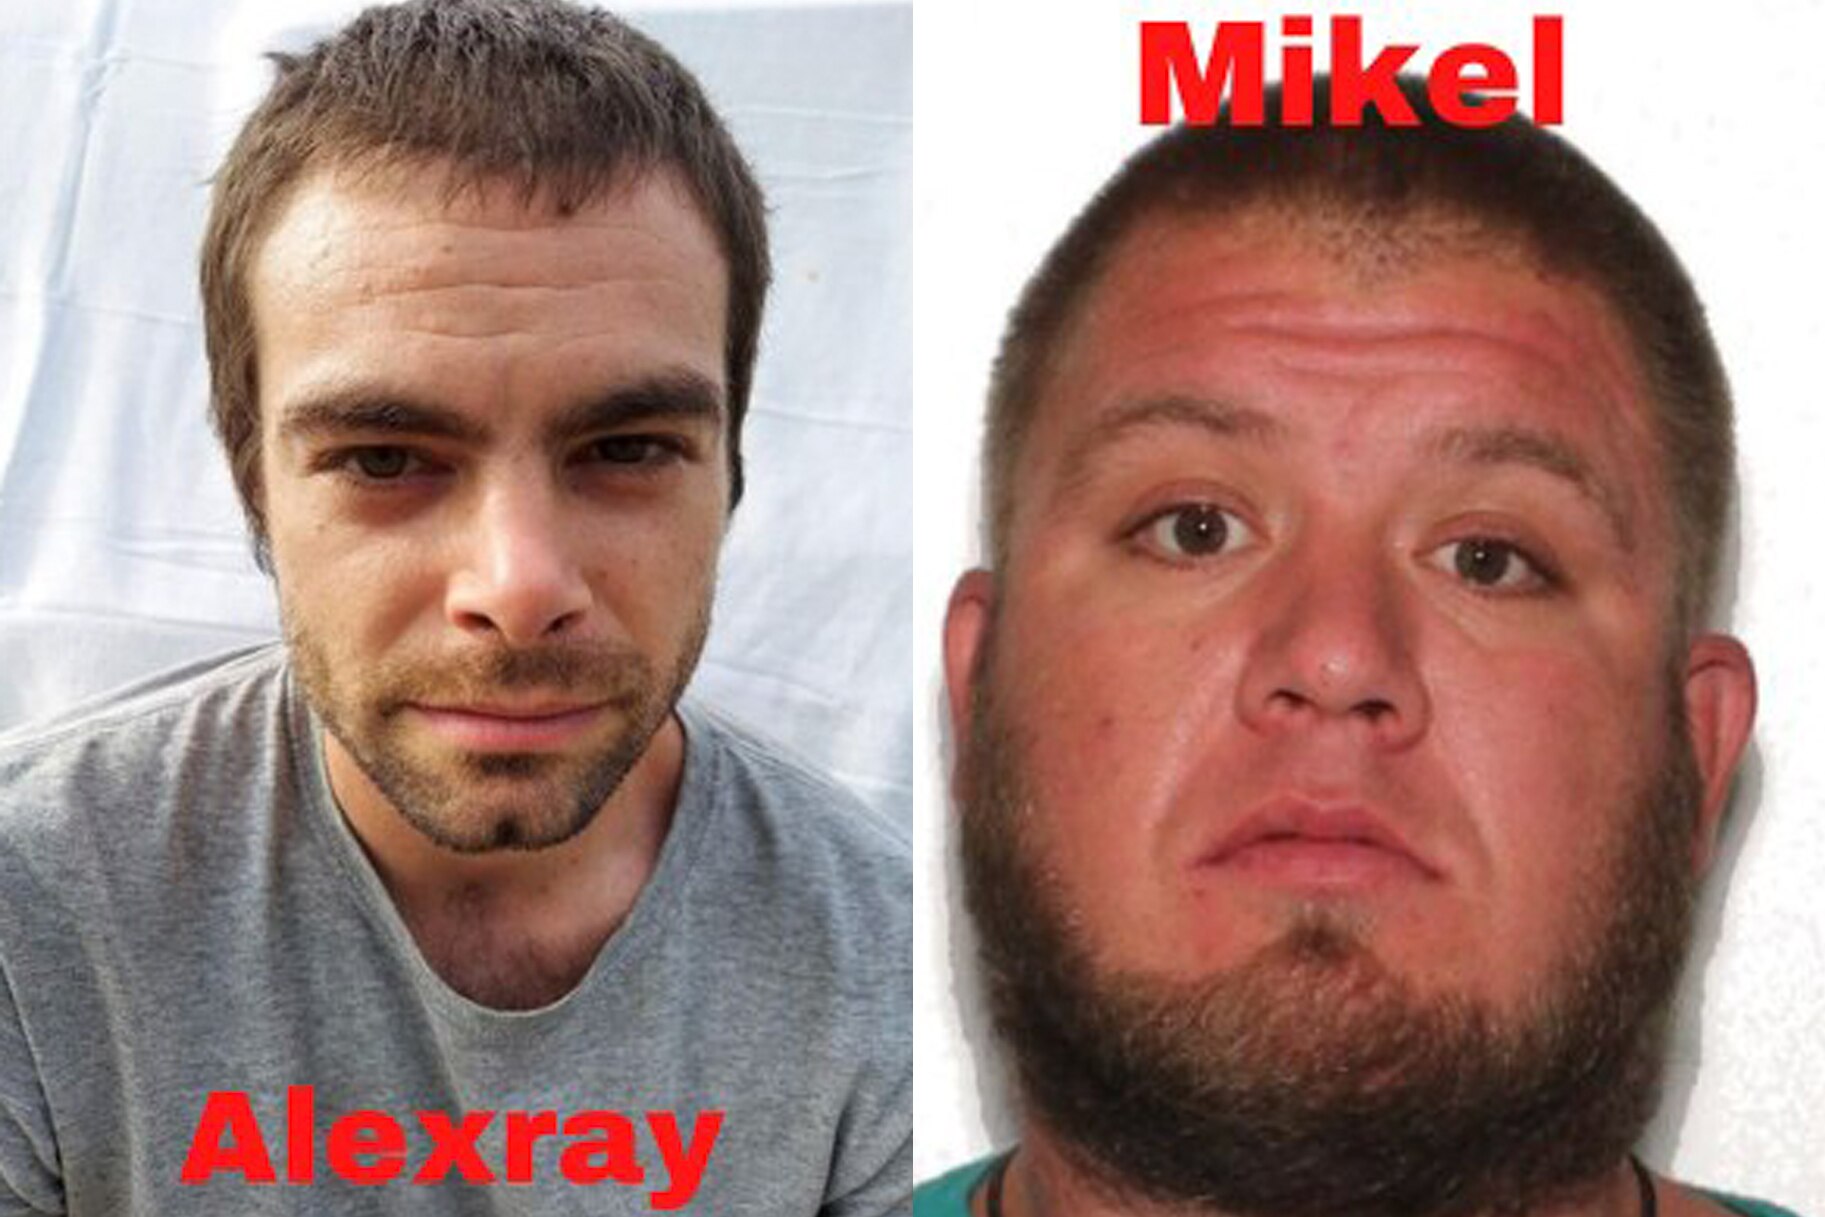 Police handouts of Alex Stevens and Mike Sparks